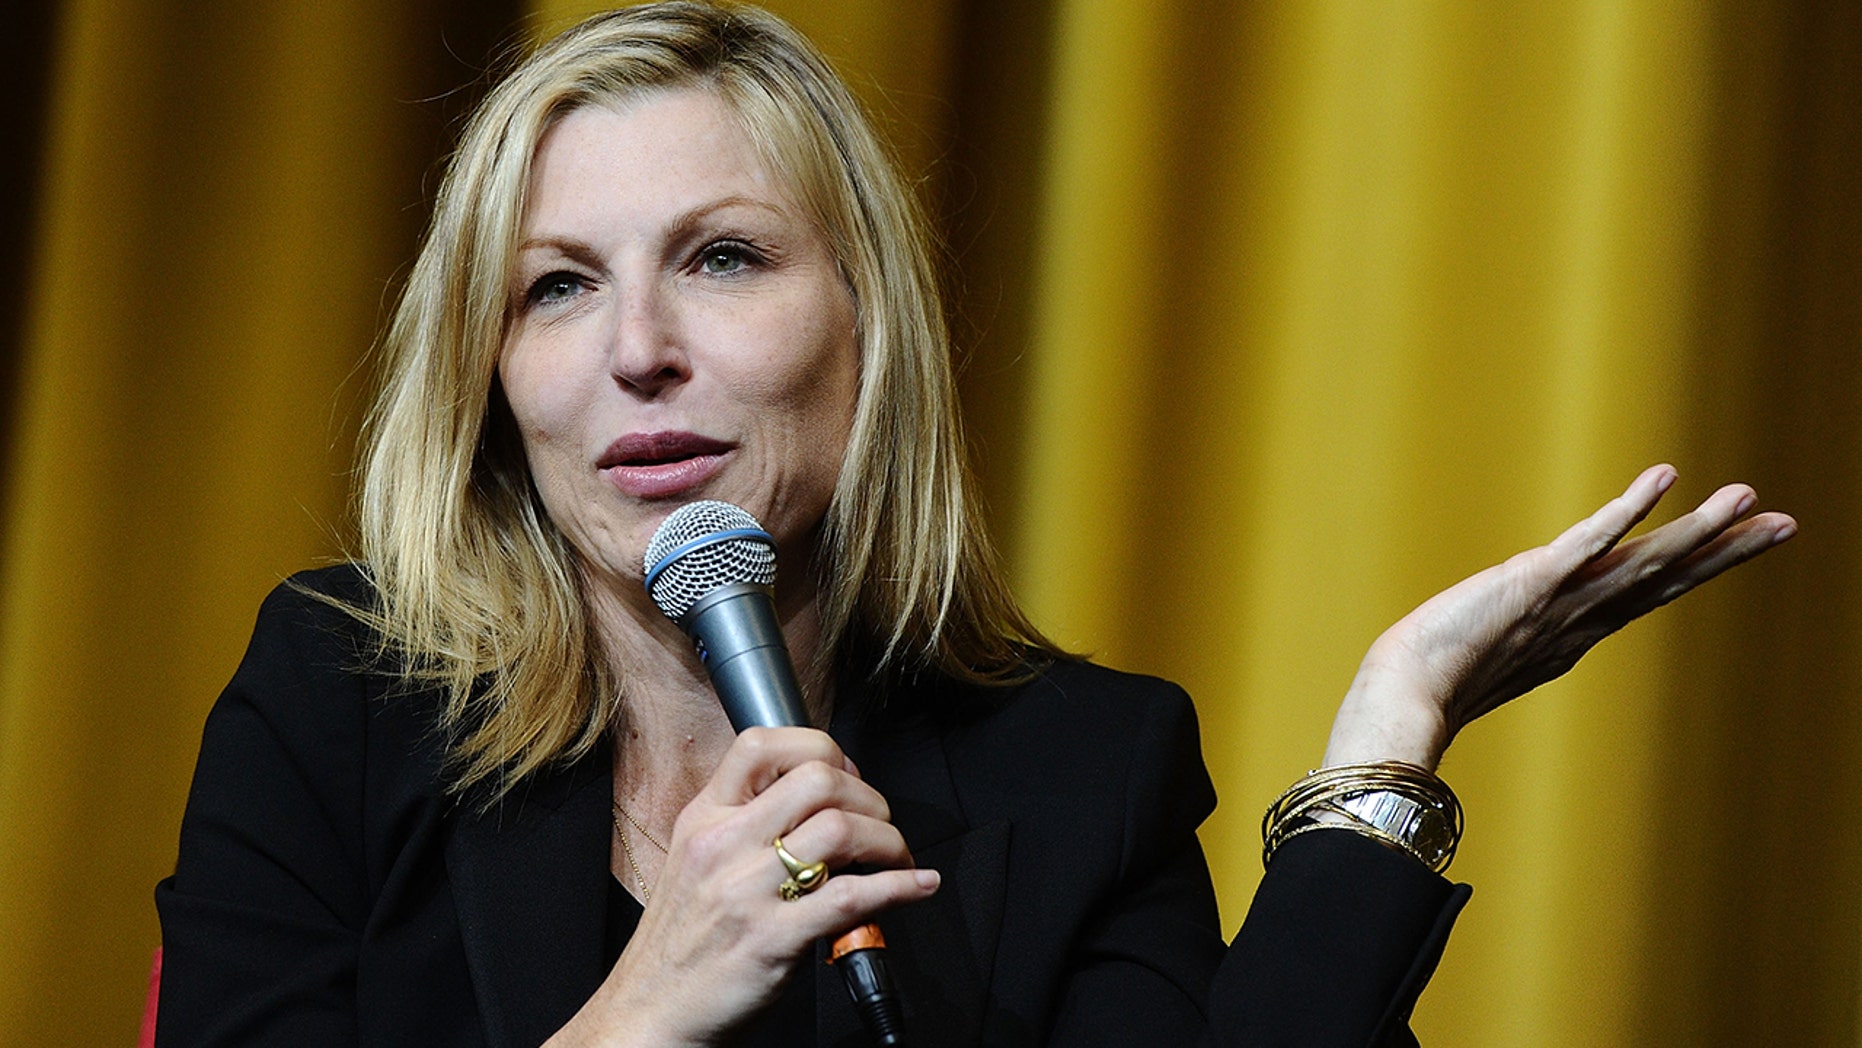 Tatum O 'Neal revealed that she was a survivor of multiple sexual assaults.